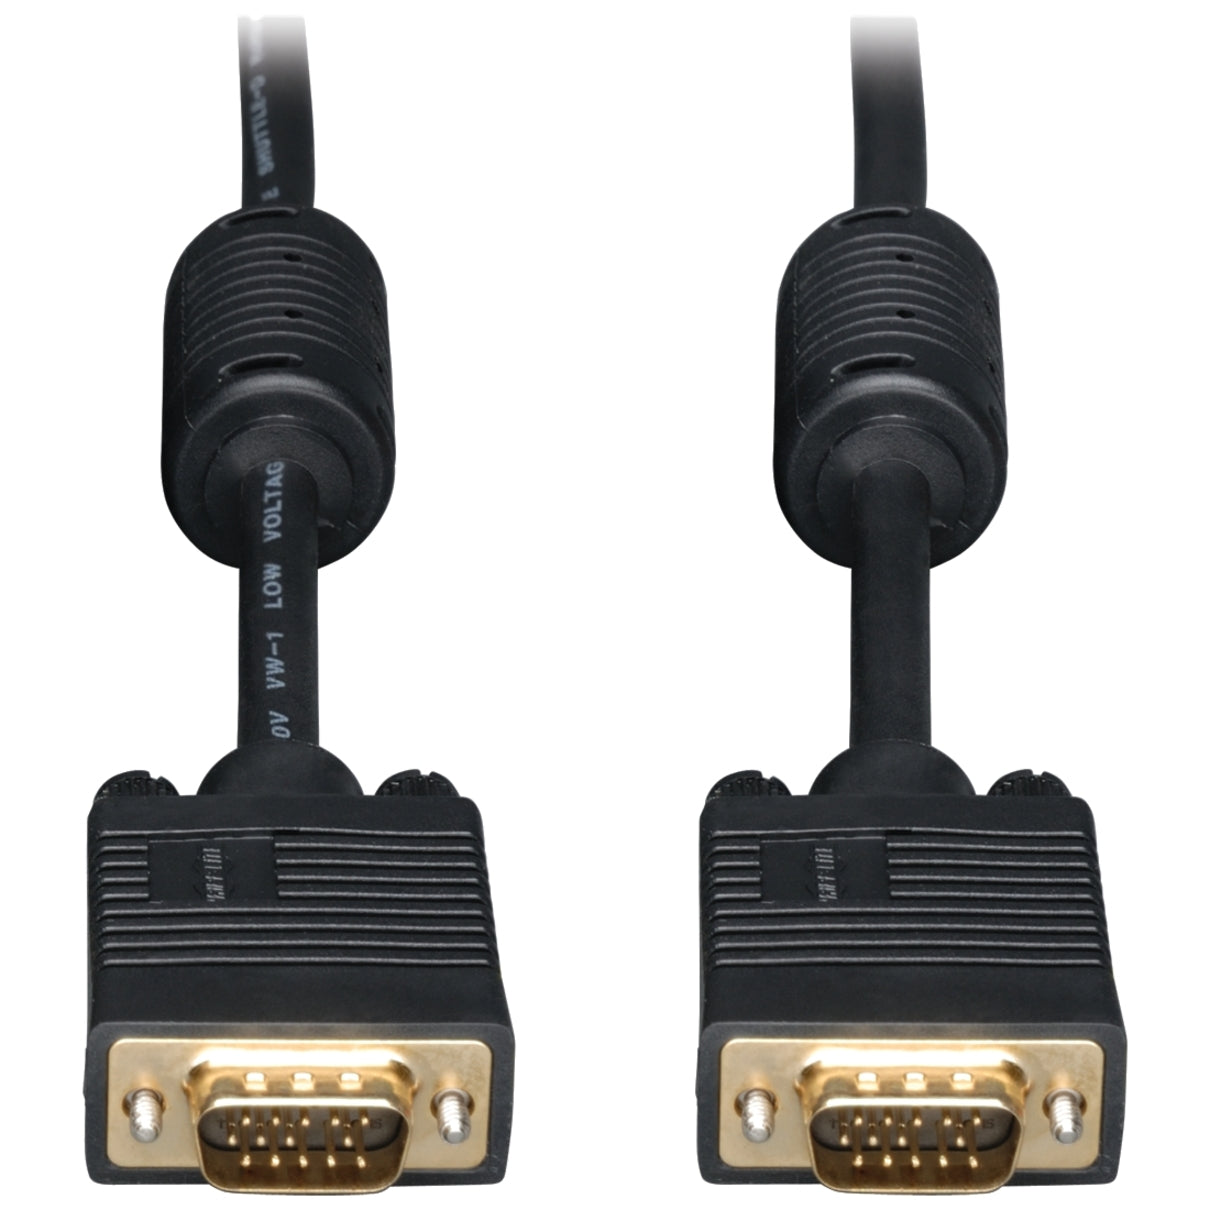 Tripp Lite P502-035 35-ft. SVGA/VGA Monitor Gold Cable with RGB Coax, High-Quality Video Transmission